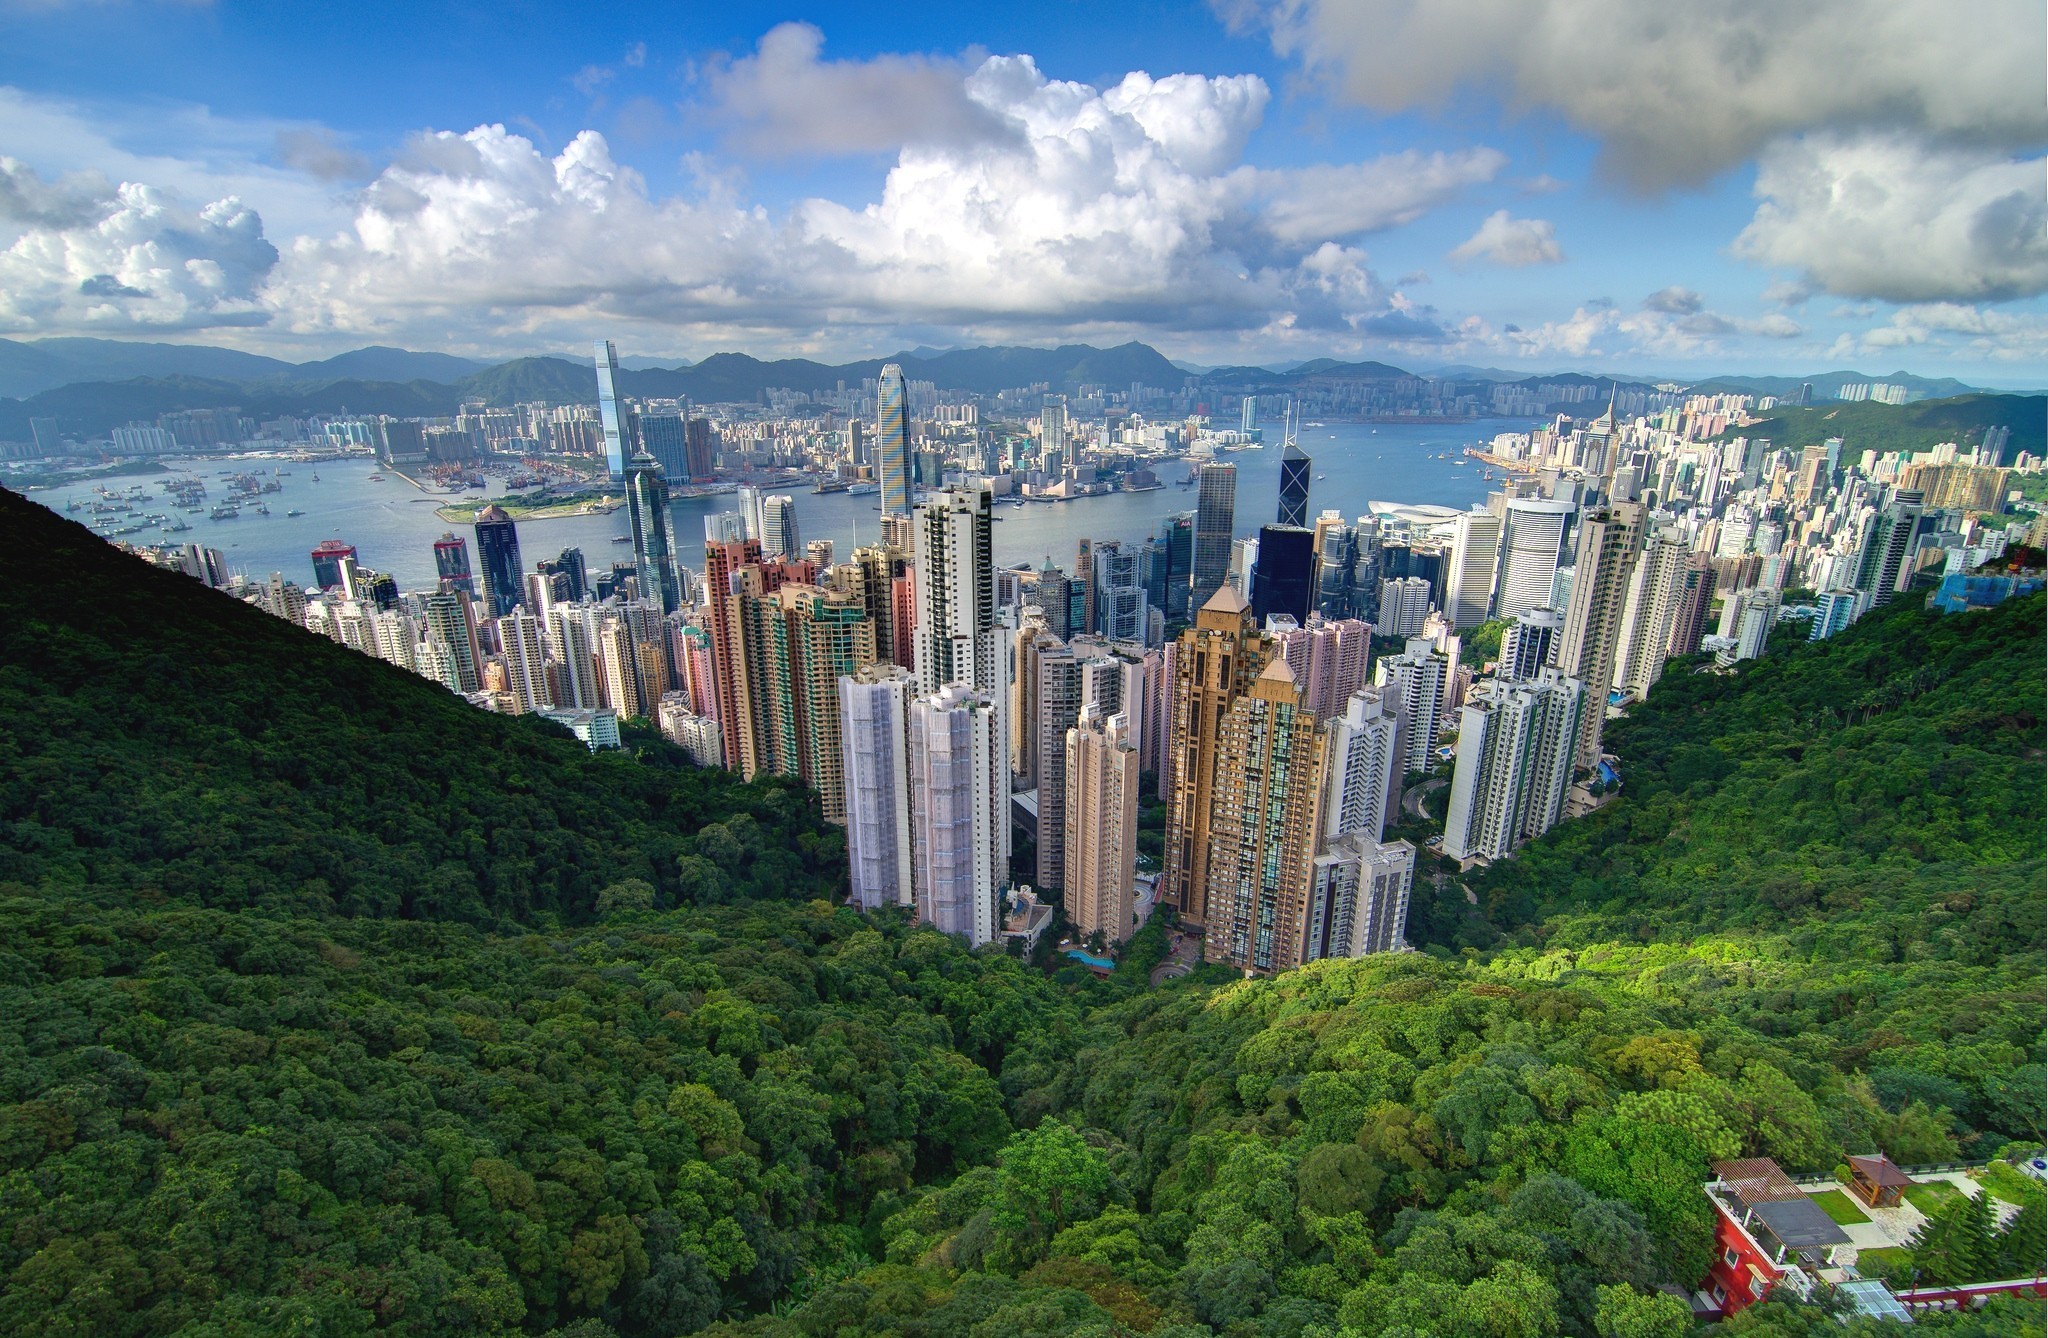 General 2048x1338 cityscape city Hong Kong Asia trees clouds